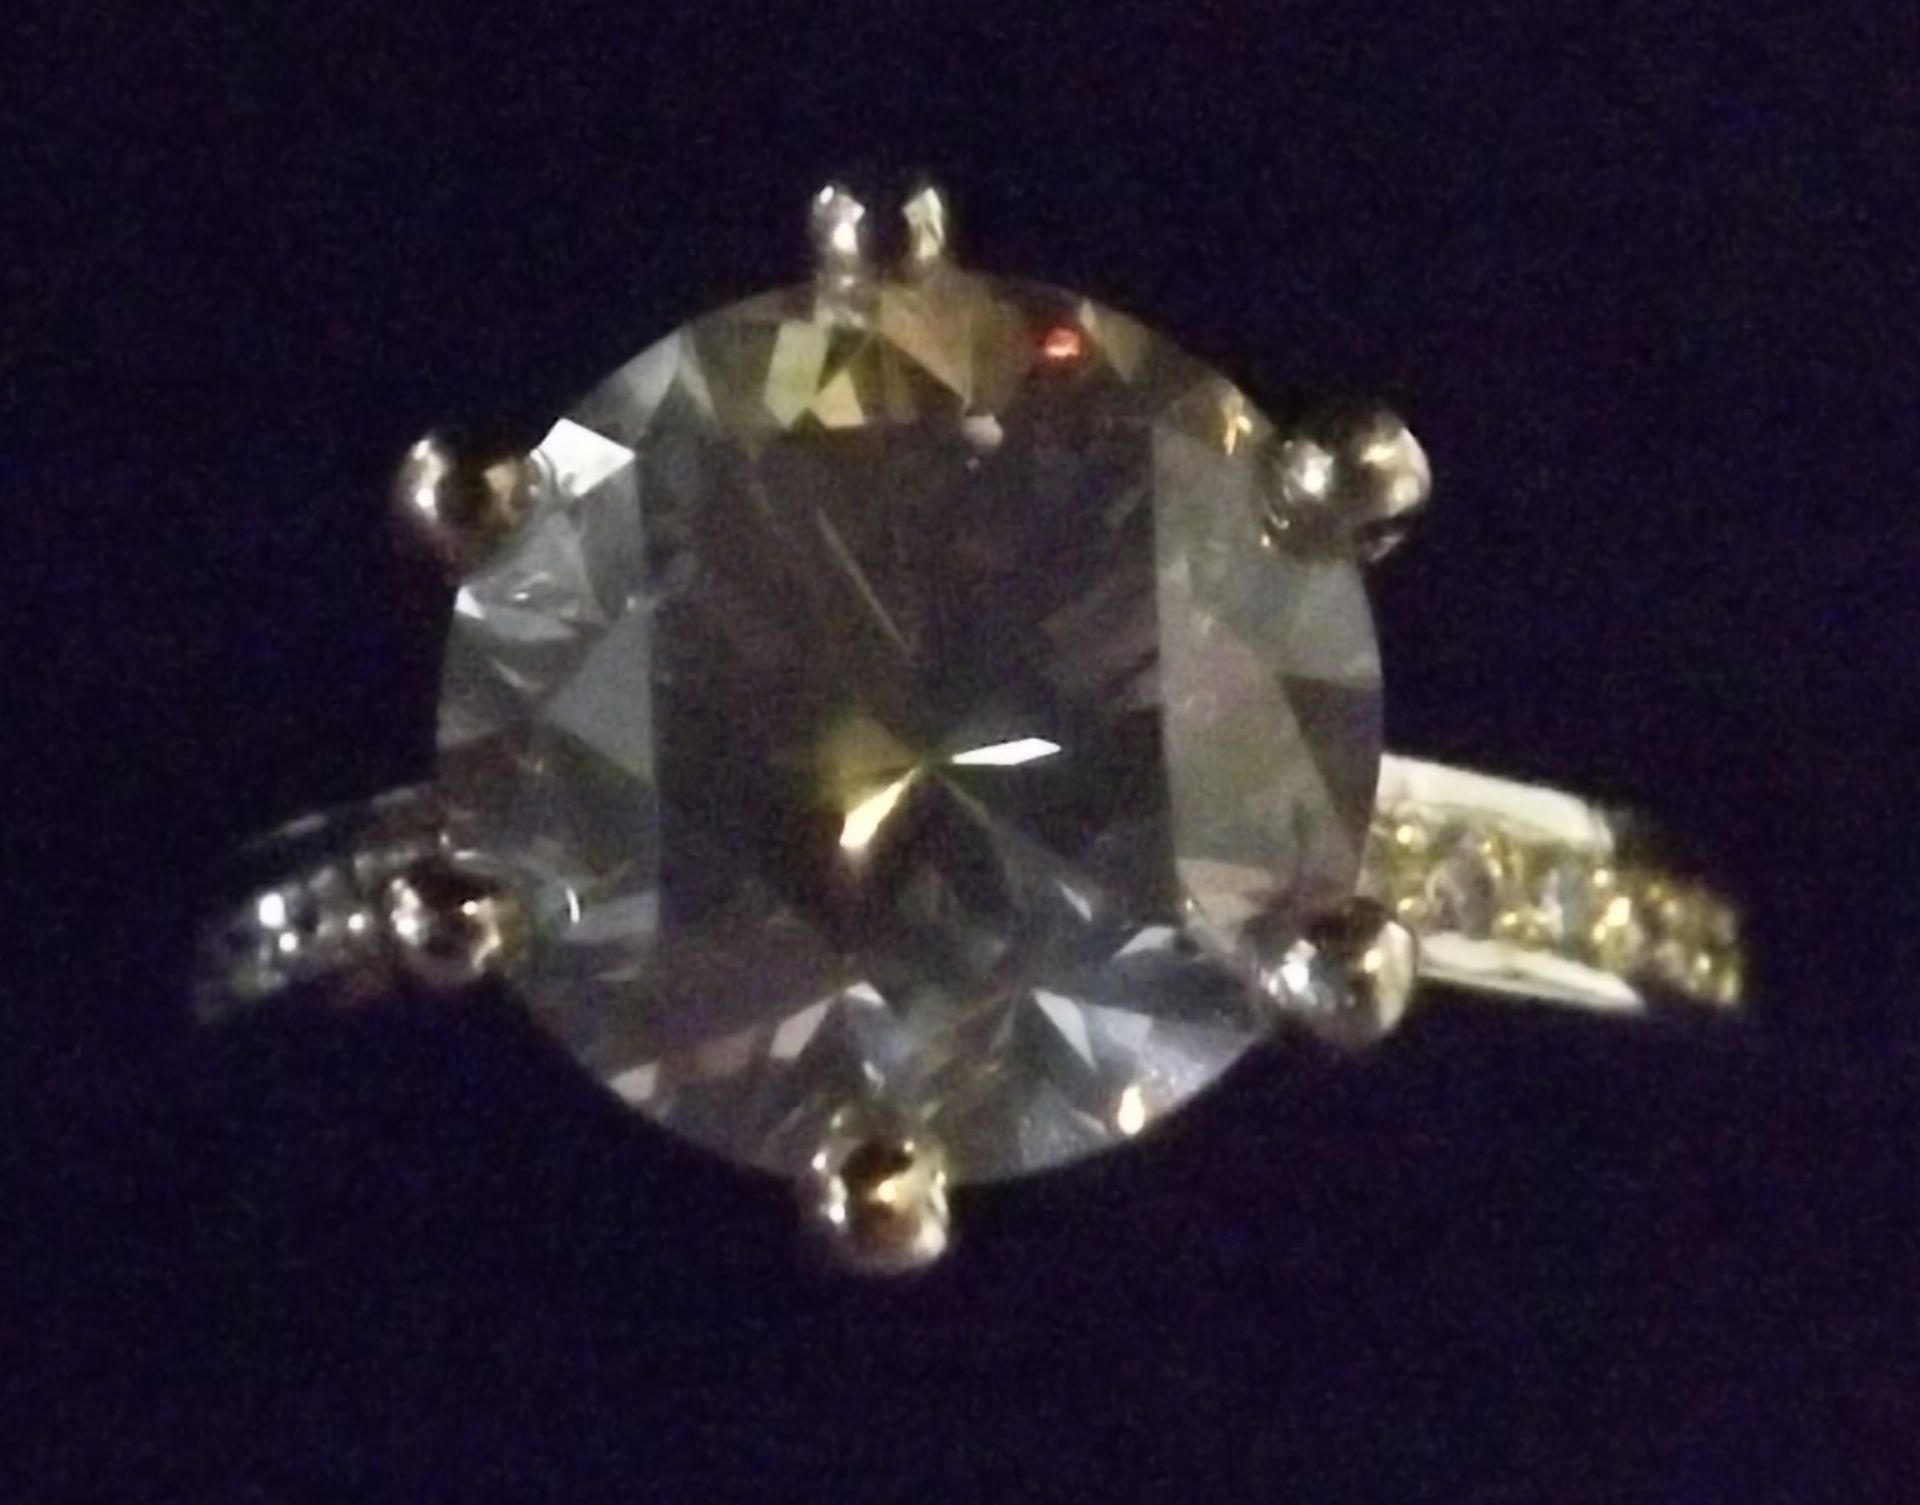 A 3.5 Carat Diamond Solitaire Ring, With a 3.0 carat single diamond, mounted in 18 carat gold, - Image 6 of 6